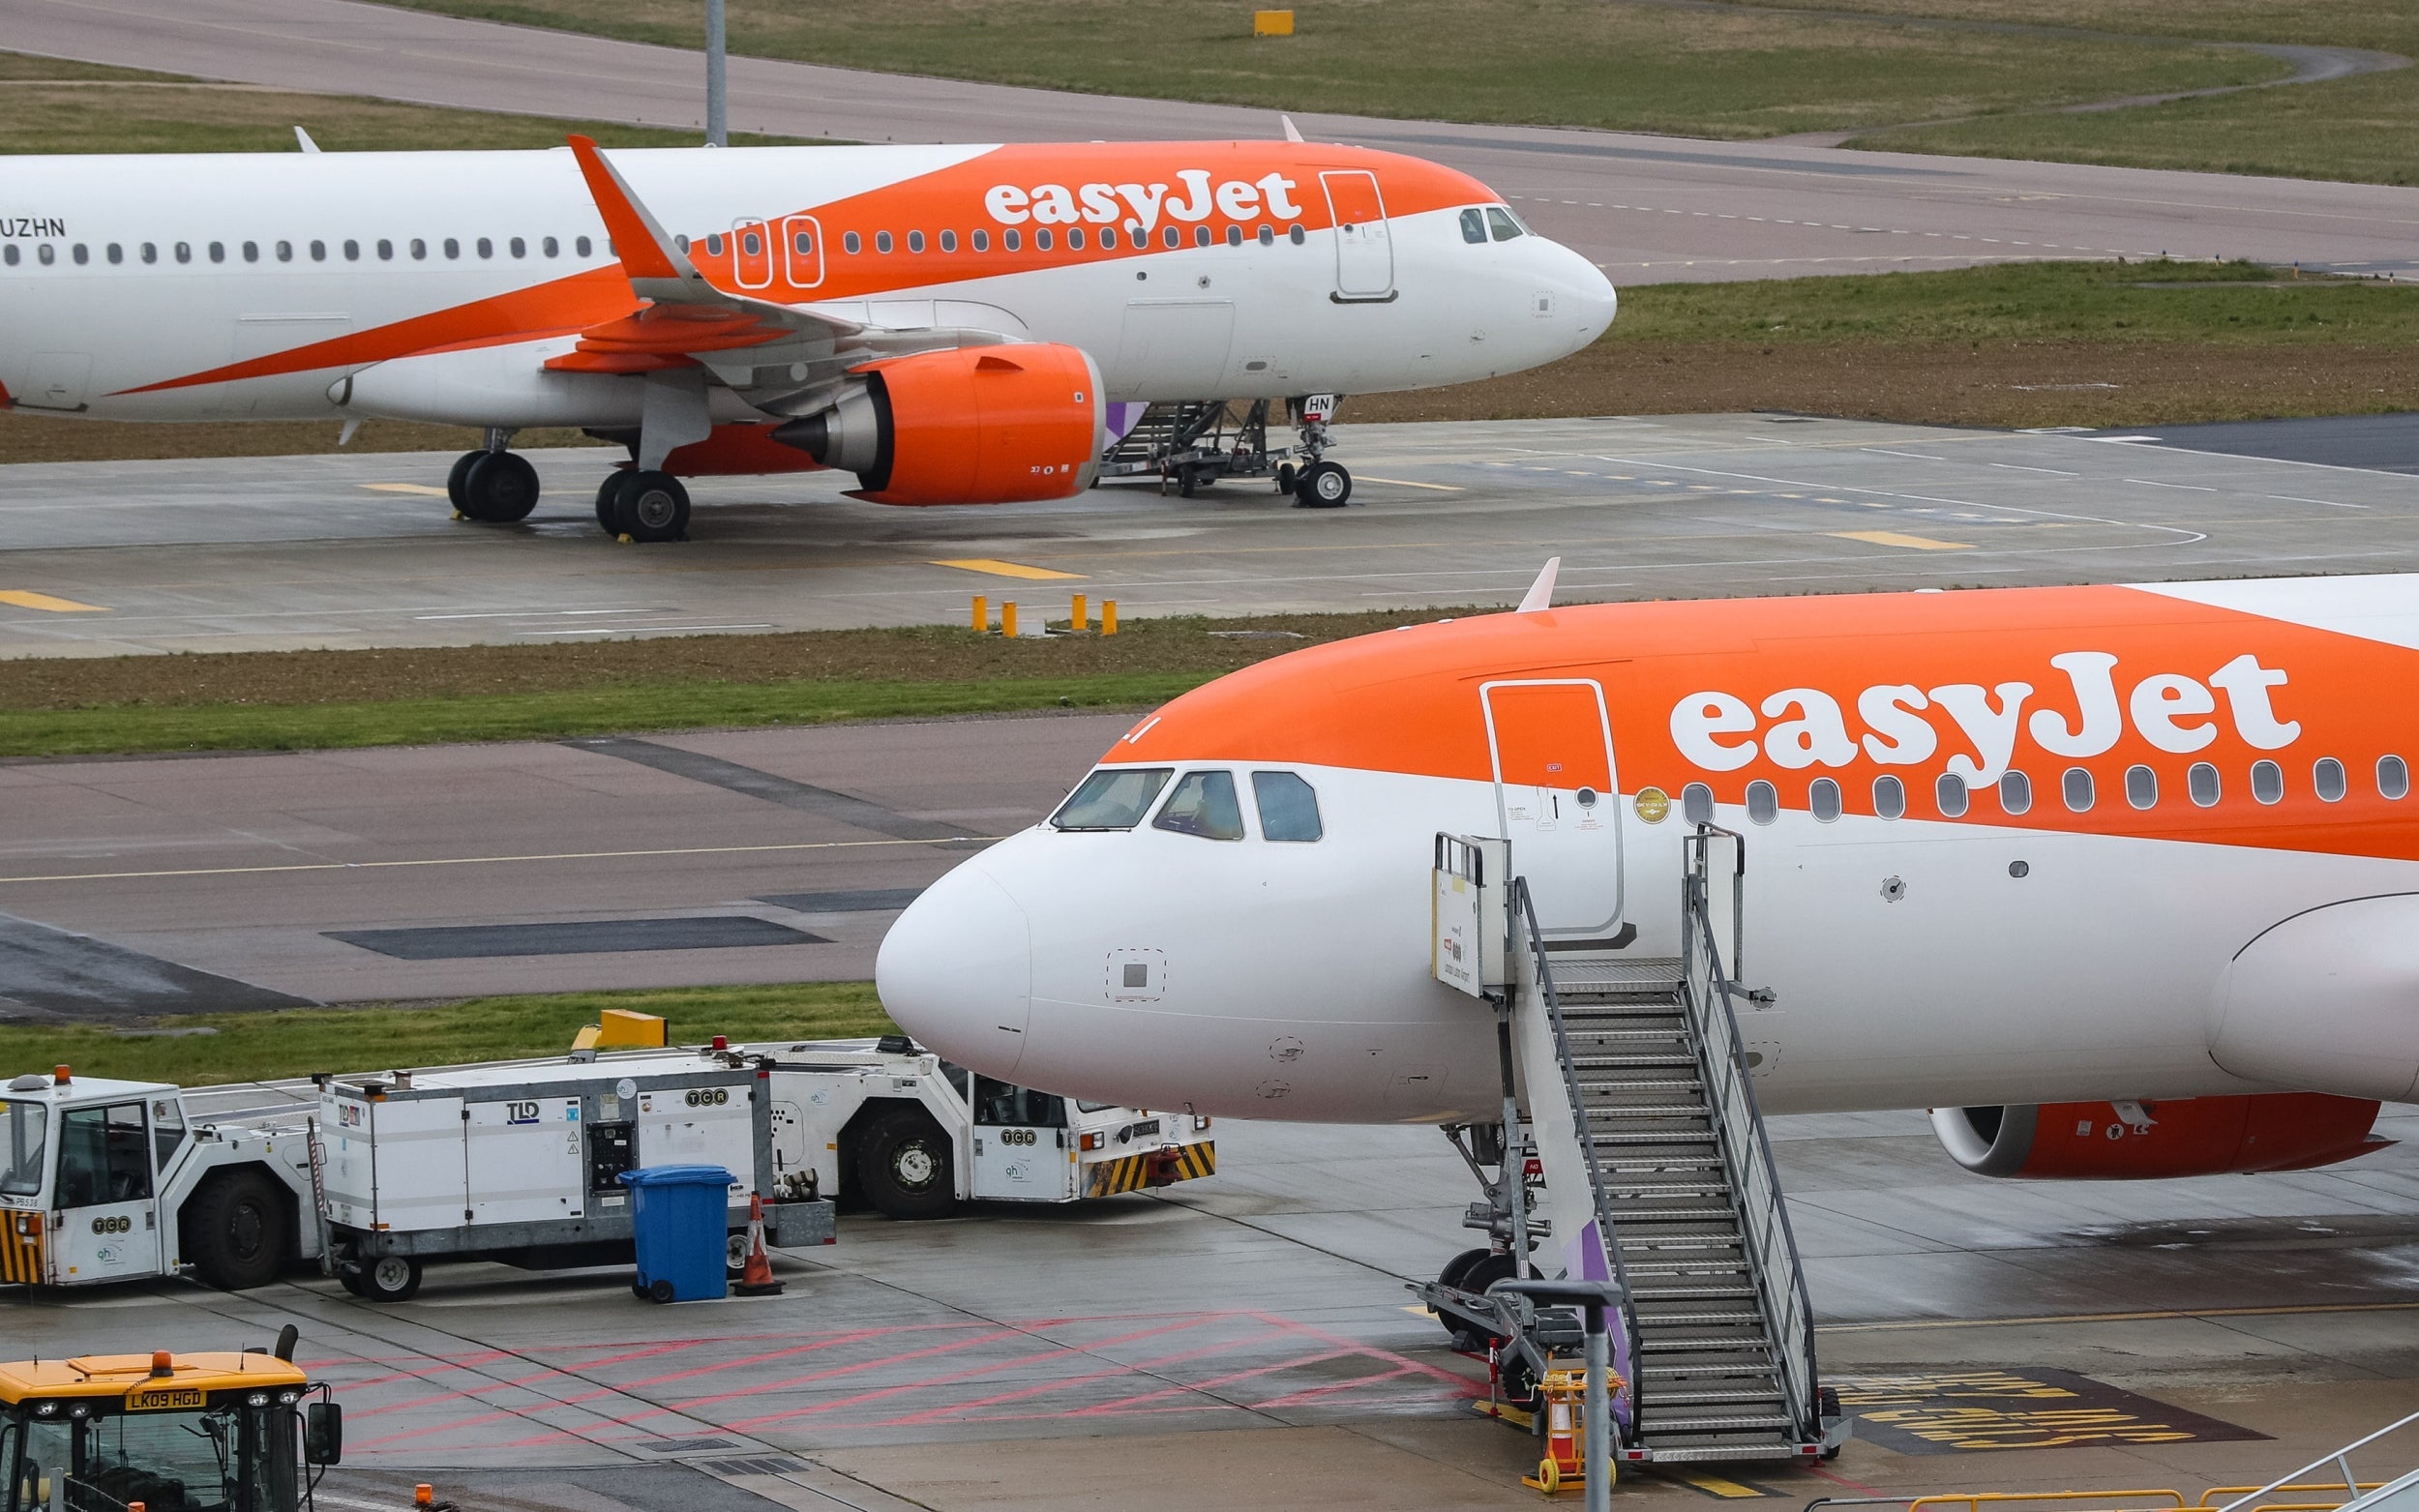 Going nowhere: easyJet planes sit on the tarmac at Luton airport this week